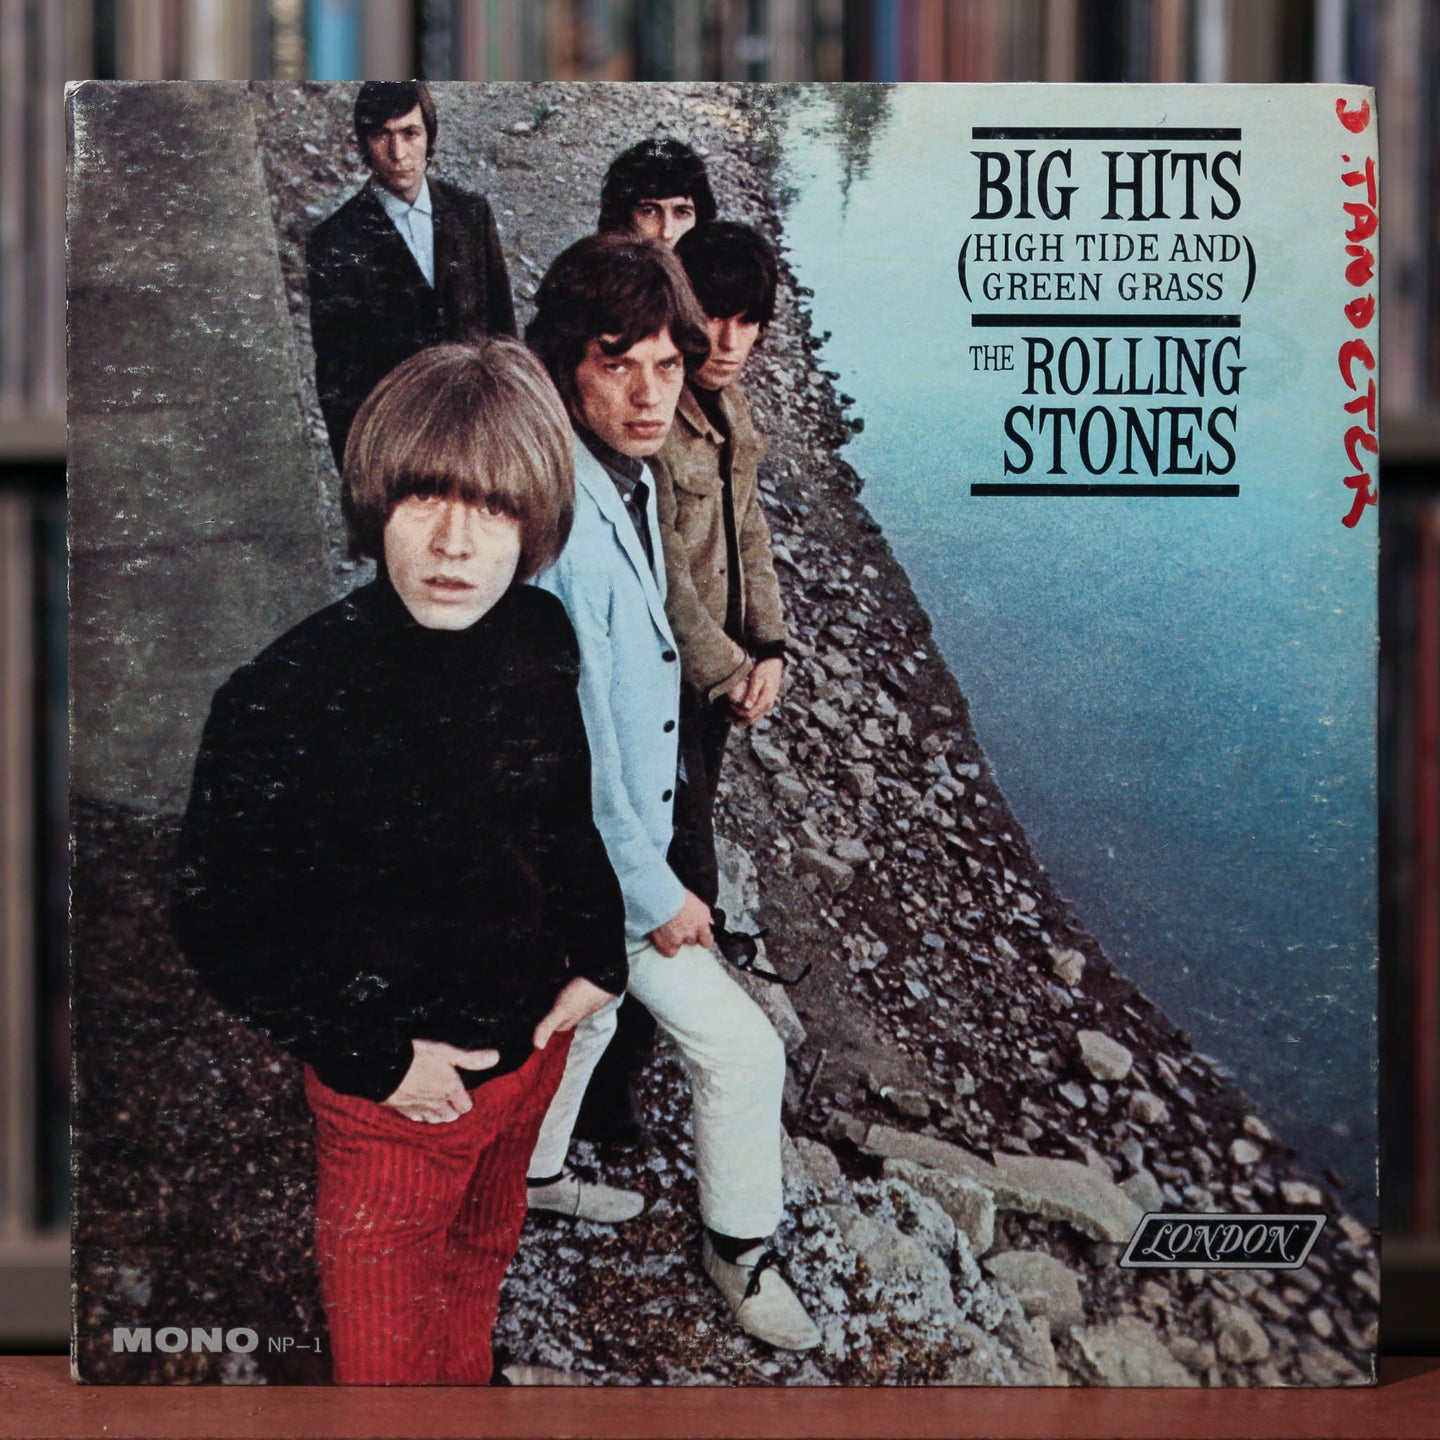 Rolling Stones - Big Hits (High Tide And Green Grass) - 1966 London, VG+/VG